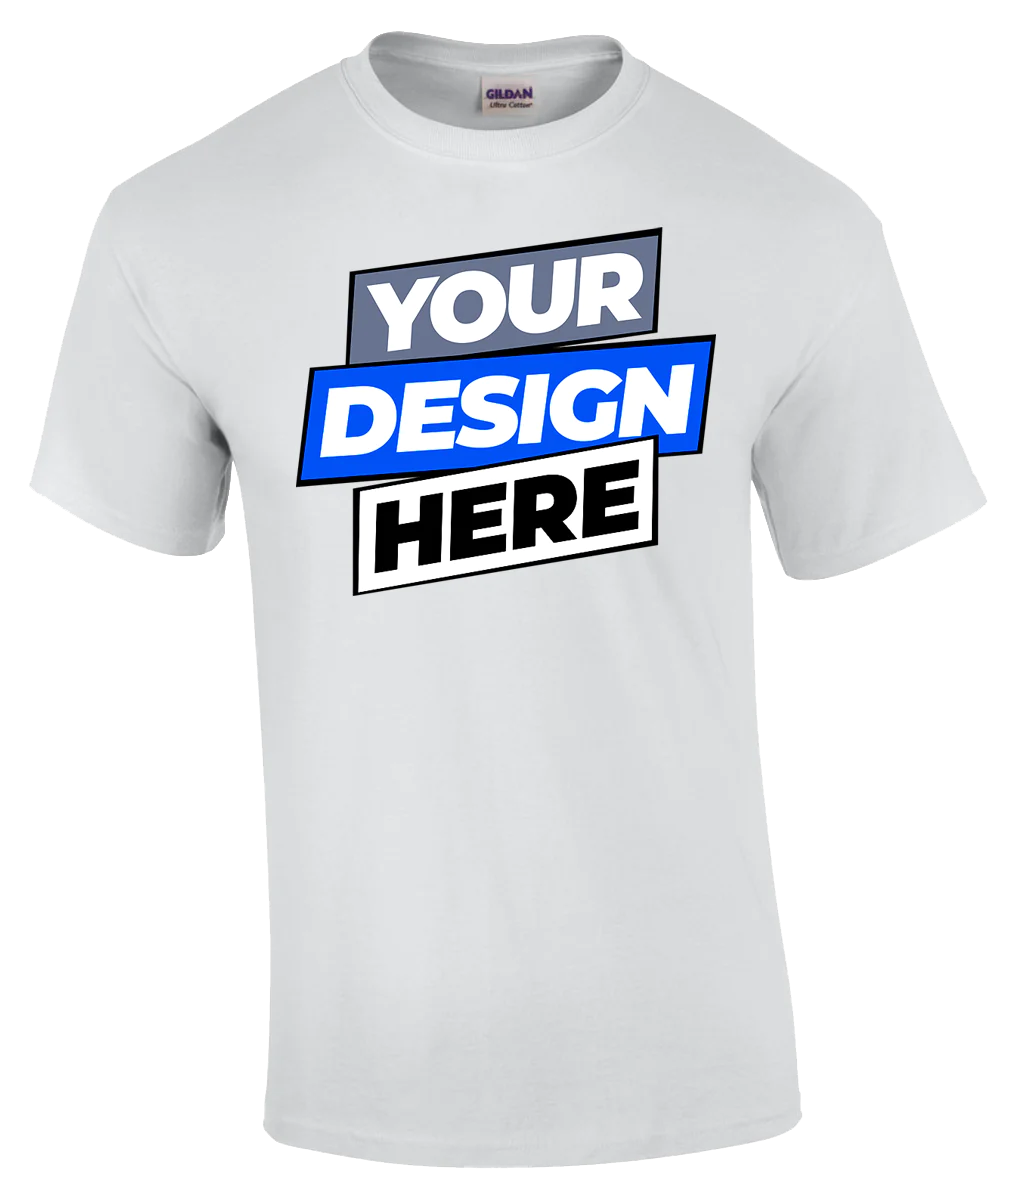 Design Your T-Shirt Here – GraphicStop